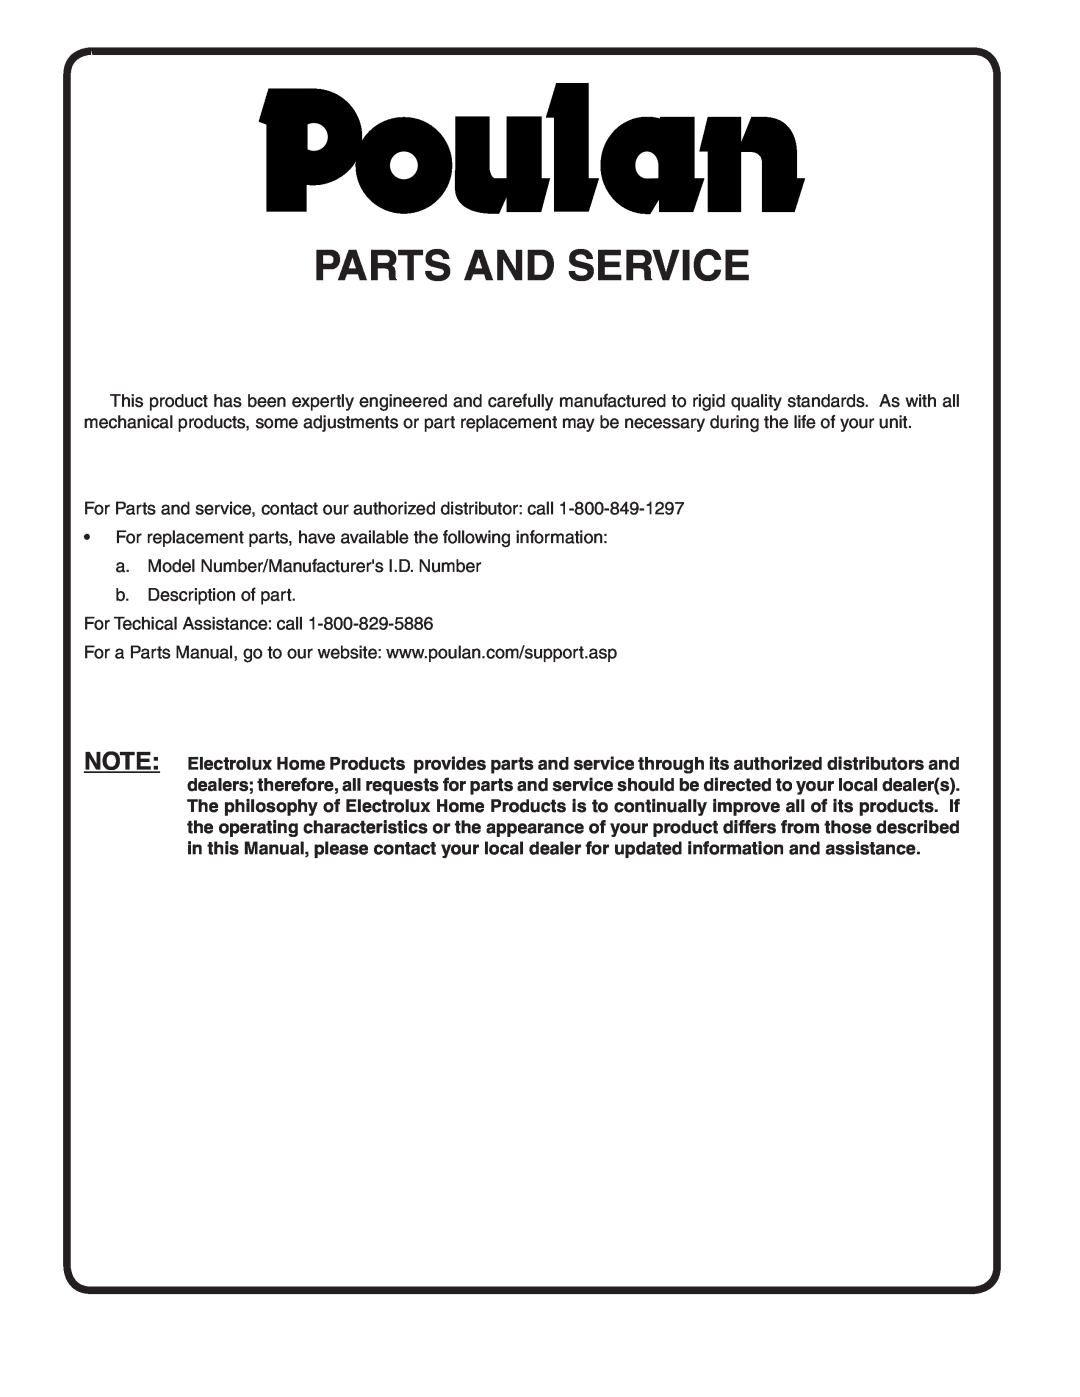 Poulan 403808 manual Parts And Service 